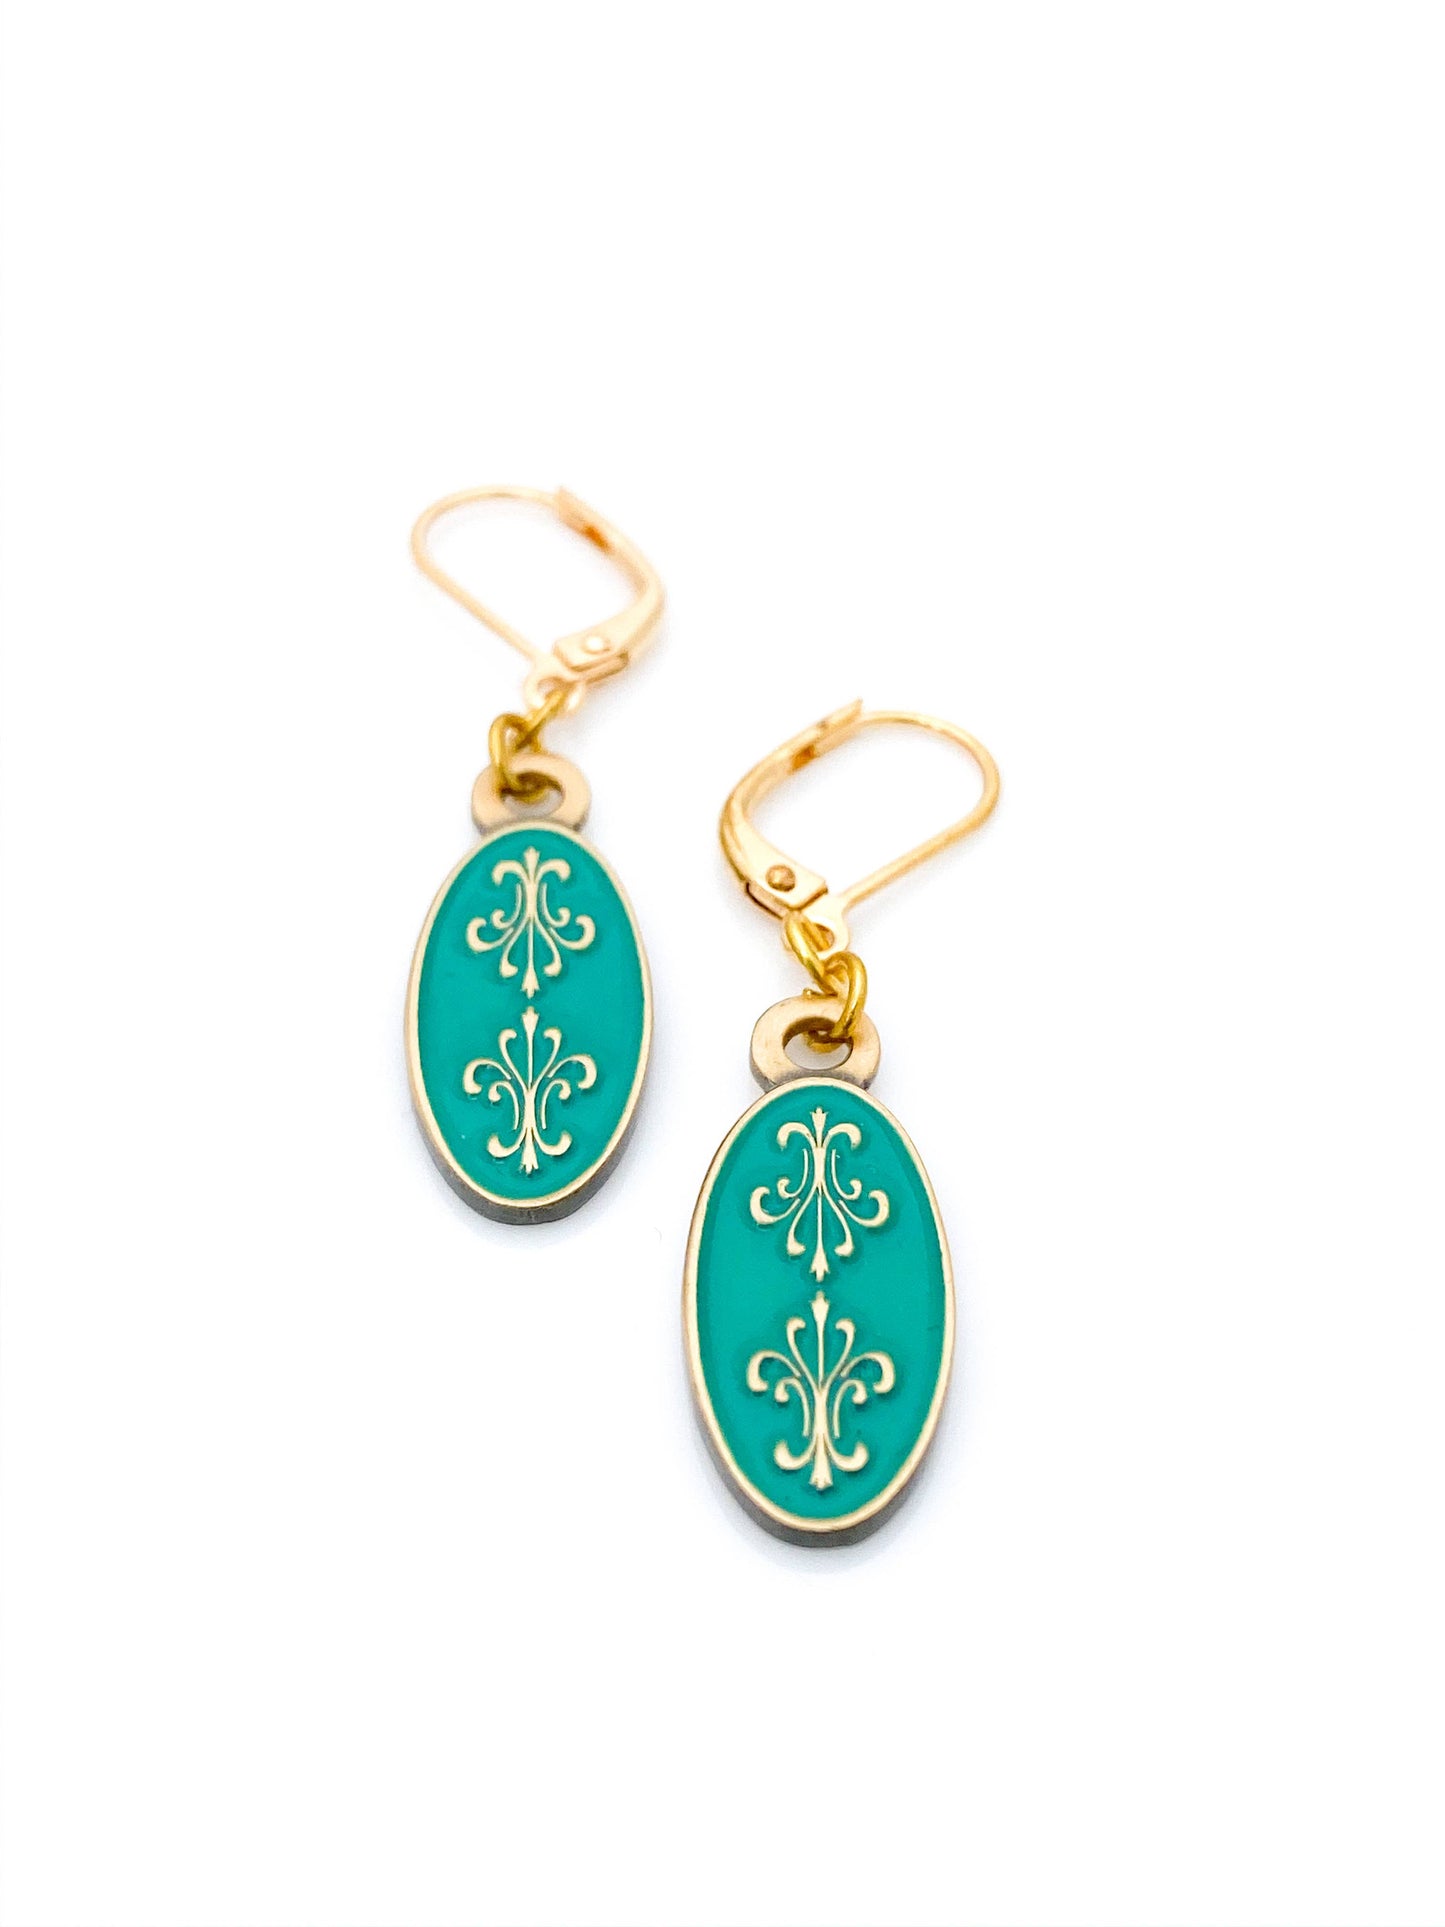 Antiqued gold oval earrings with two fleur de lys back to back on green enamel